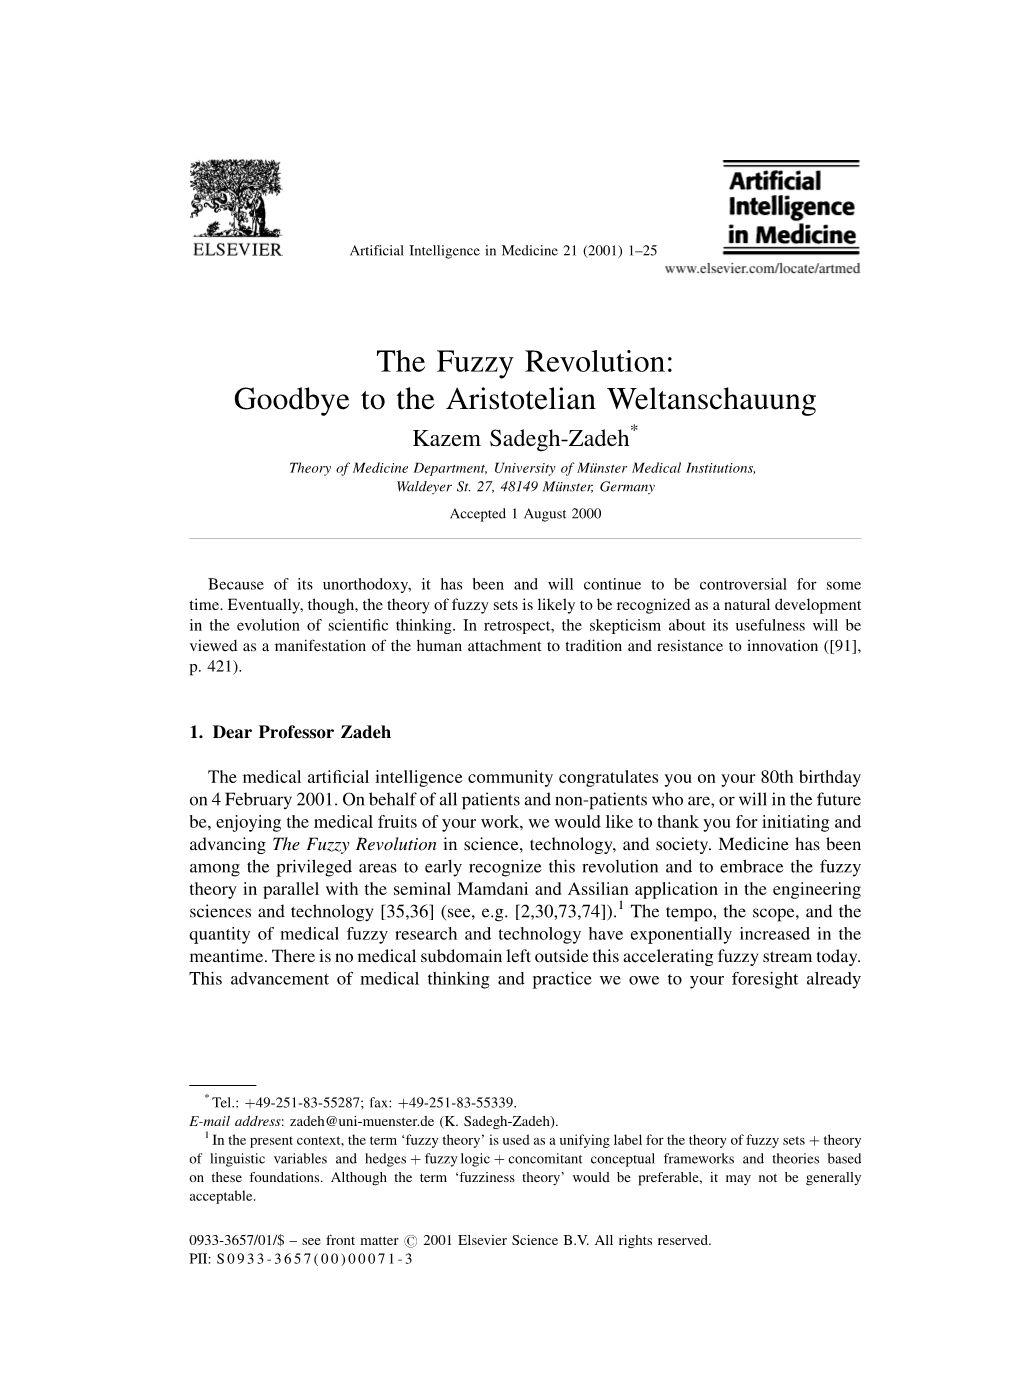 The Fuzzy Revolution: Goodbye to the Aristotelian Weltanschauung